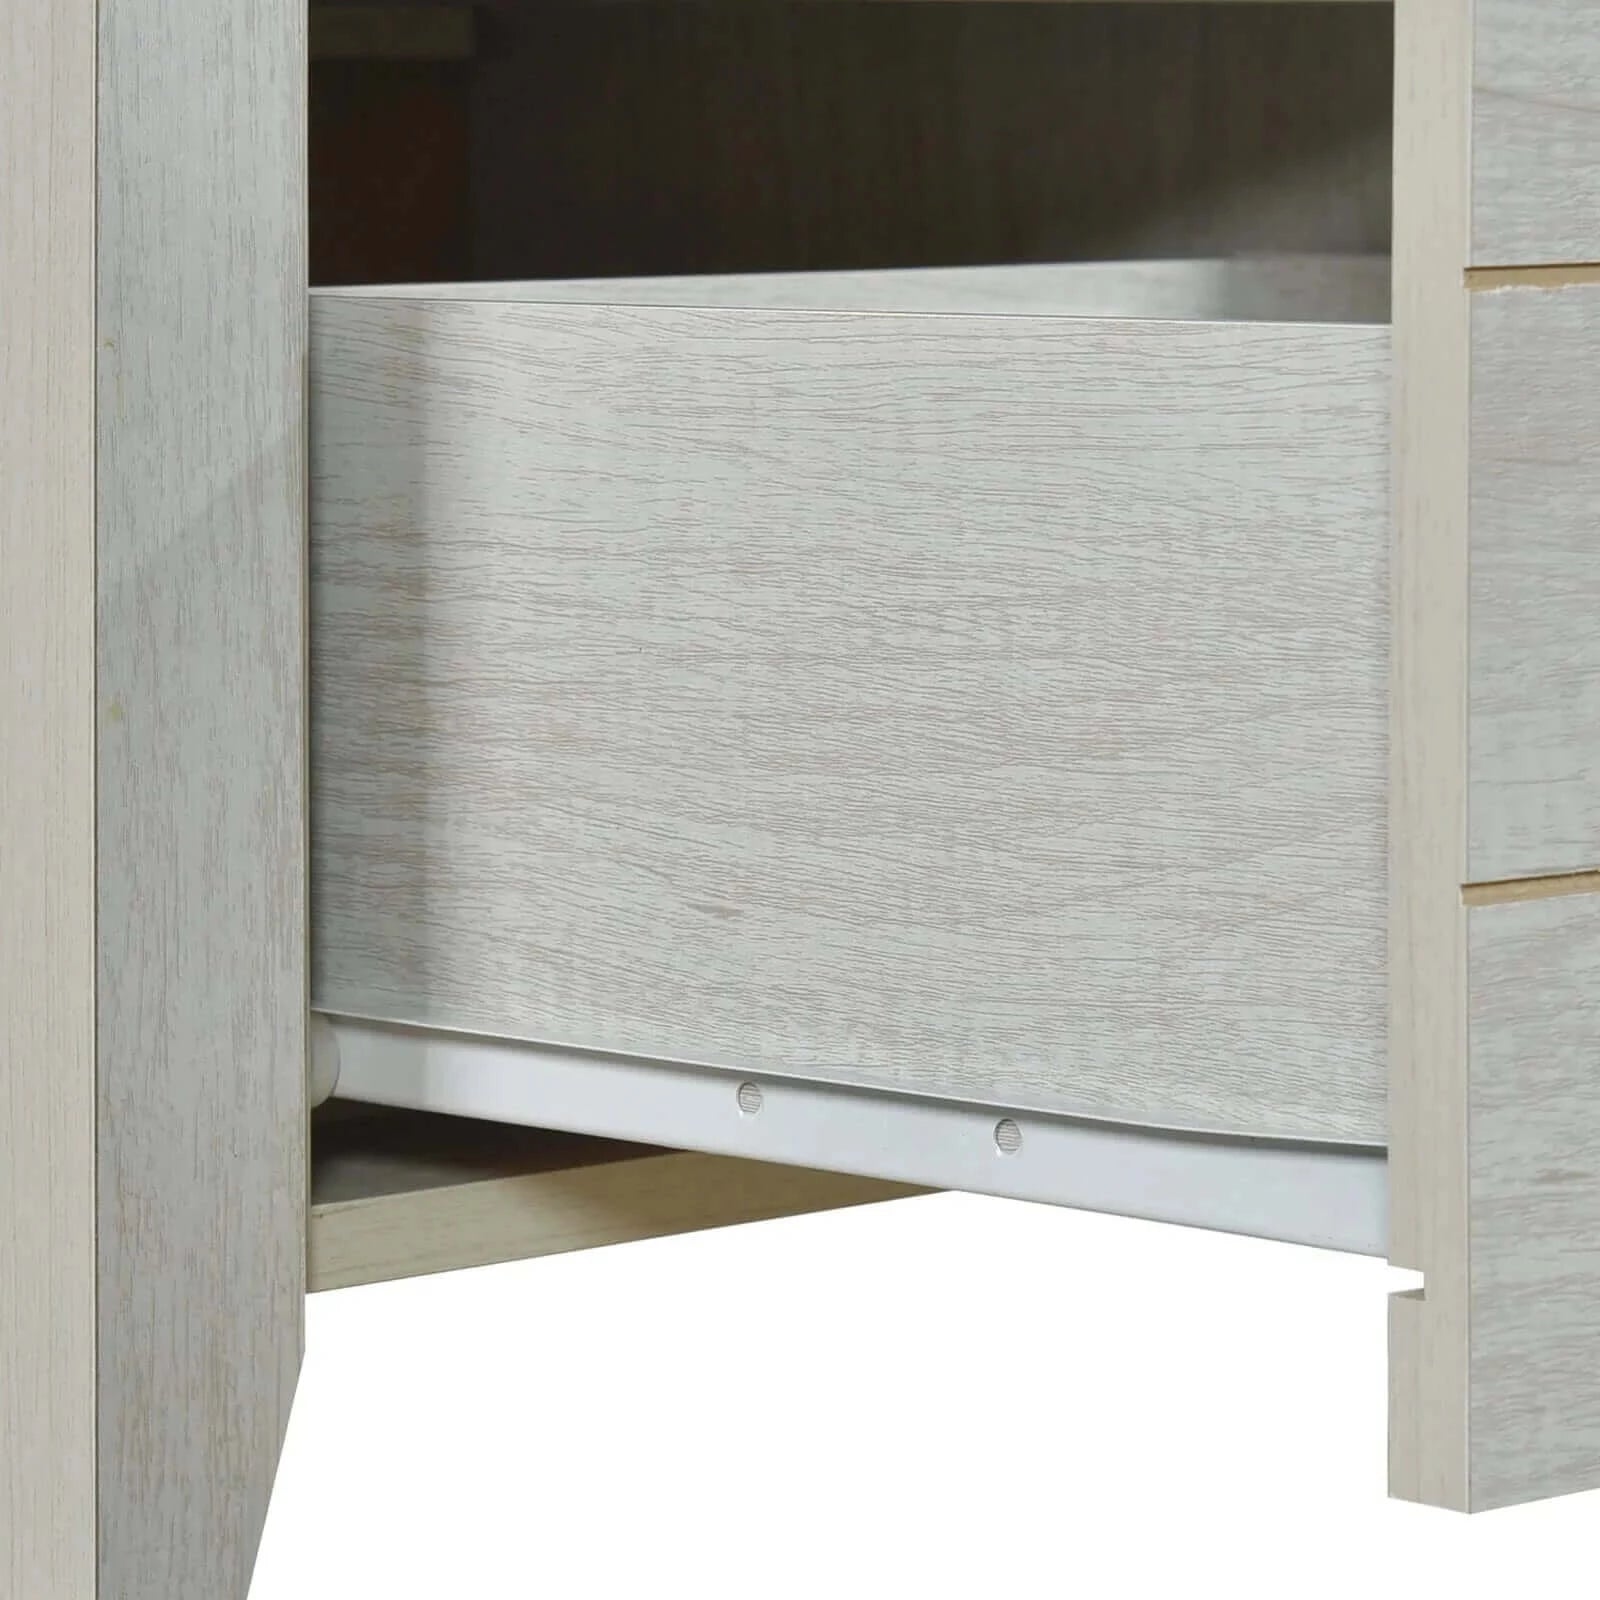 Buy 3 Pieces Bedroom Suite Natural Wood Like MDF Structure Queen Size White Ash Colour Bed-Upinteriors